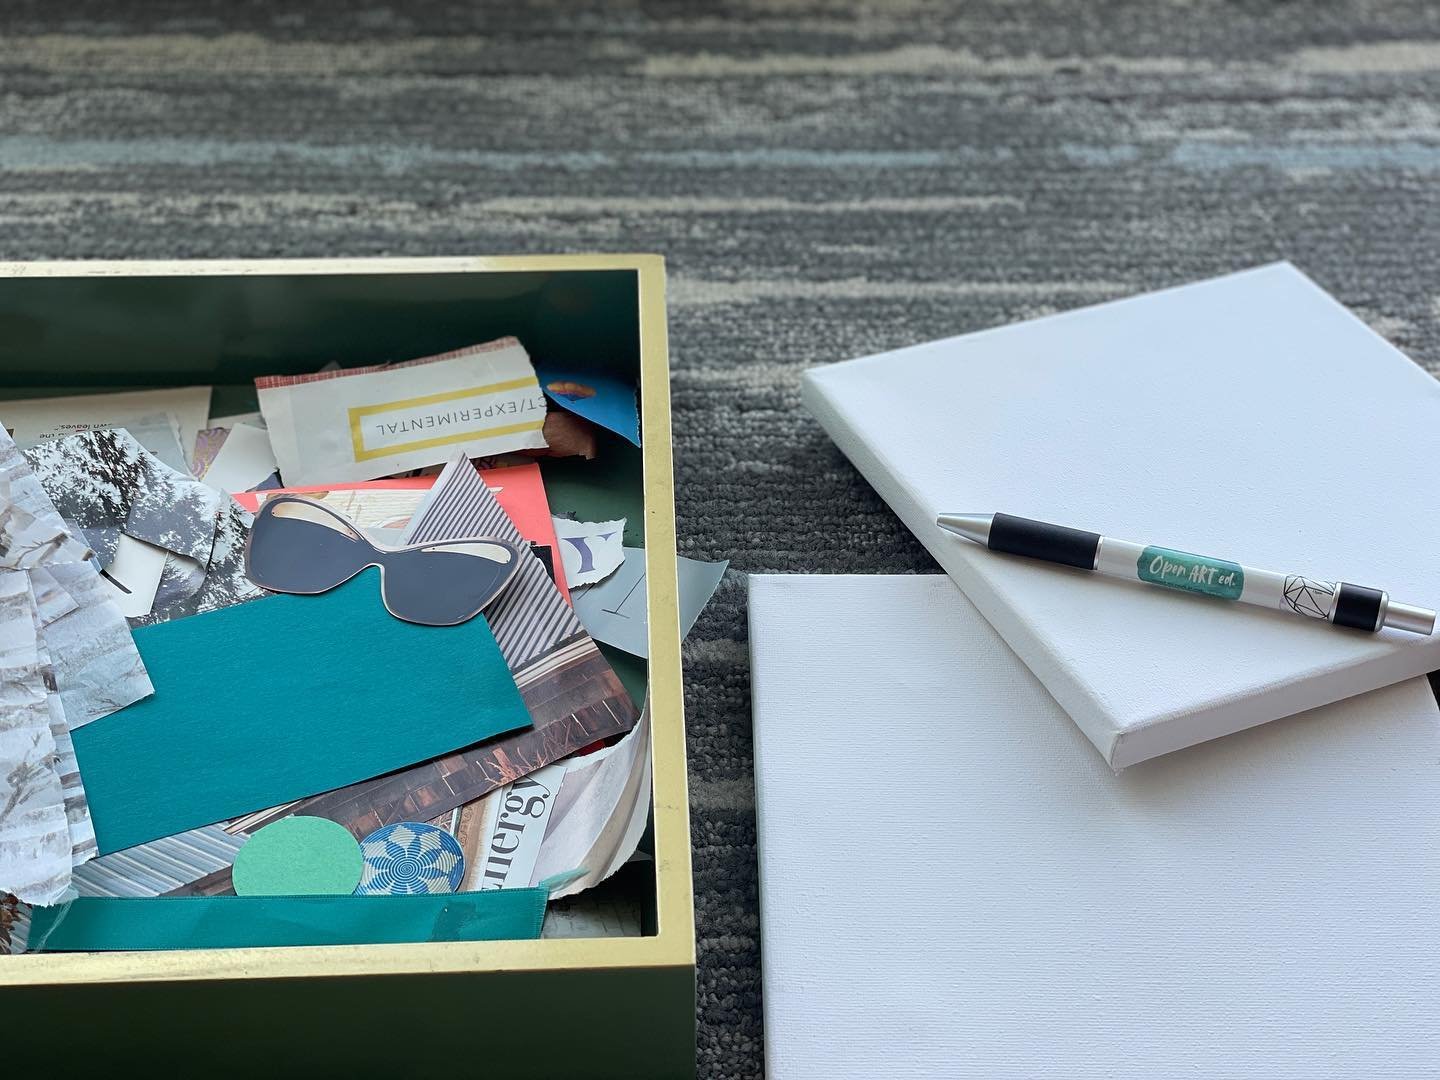 Mini collage workshop by @openarted 💜With this little art box &lsquo;kit&rsquo; you receive instructions for materials and a journaling program to guide you. Here we are identifying our values and setting intentions for our life :) @sparklinghill #c